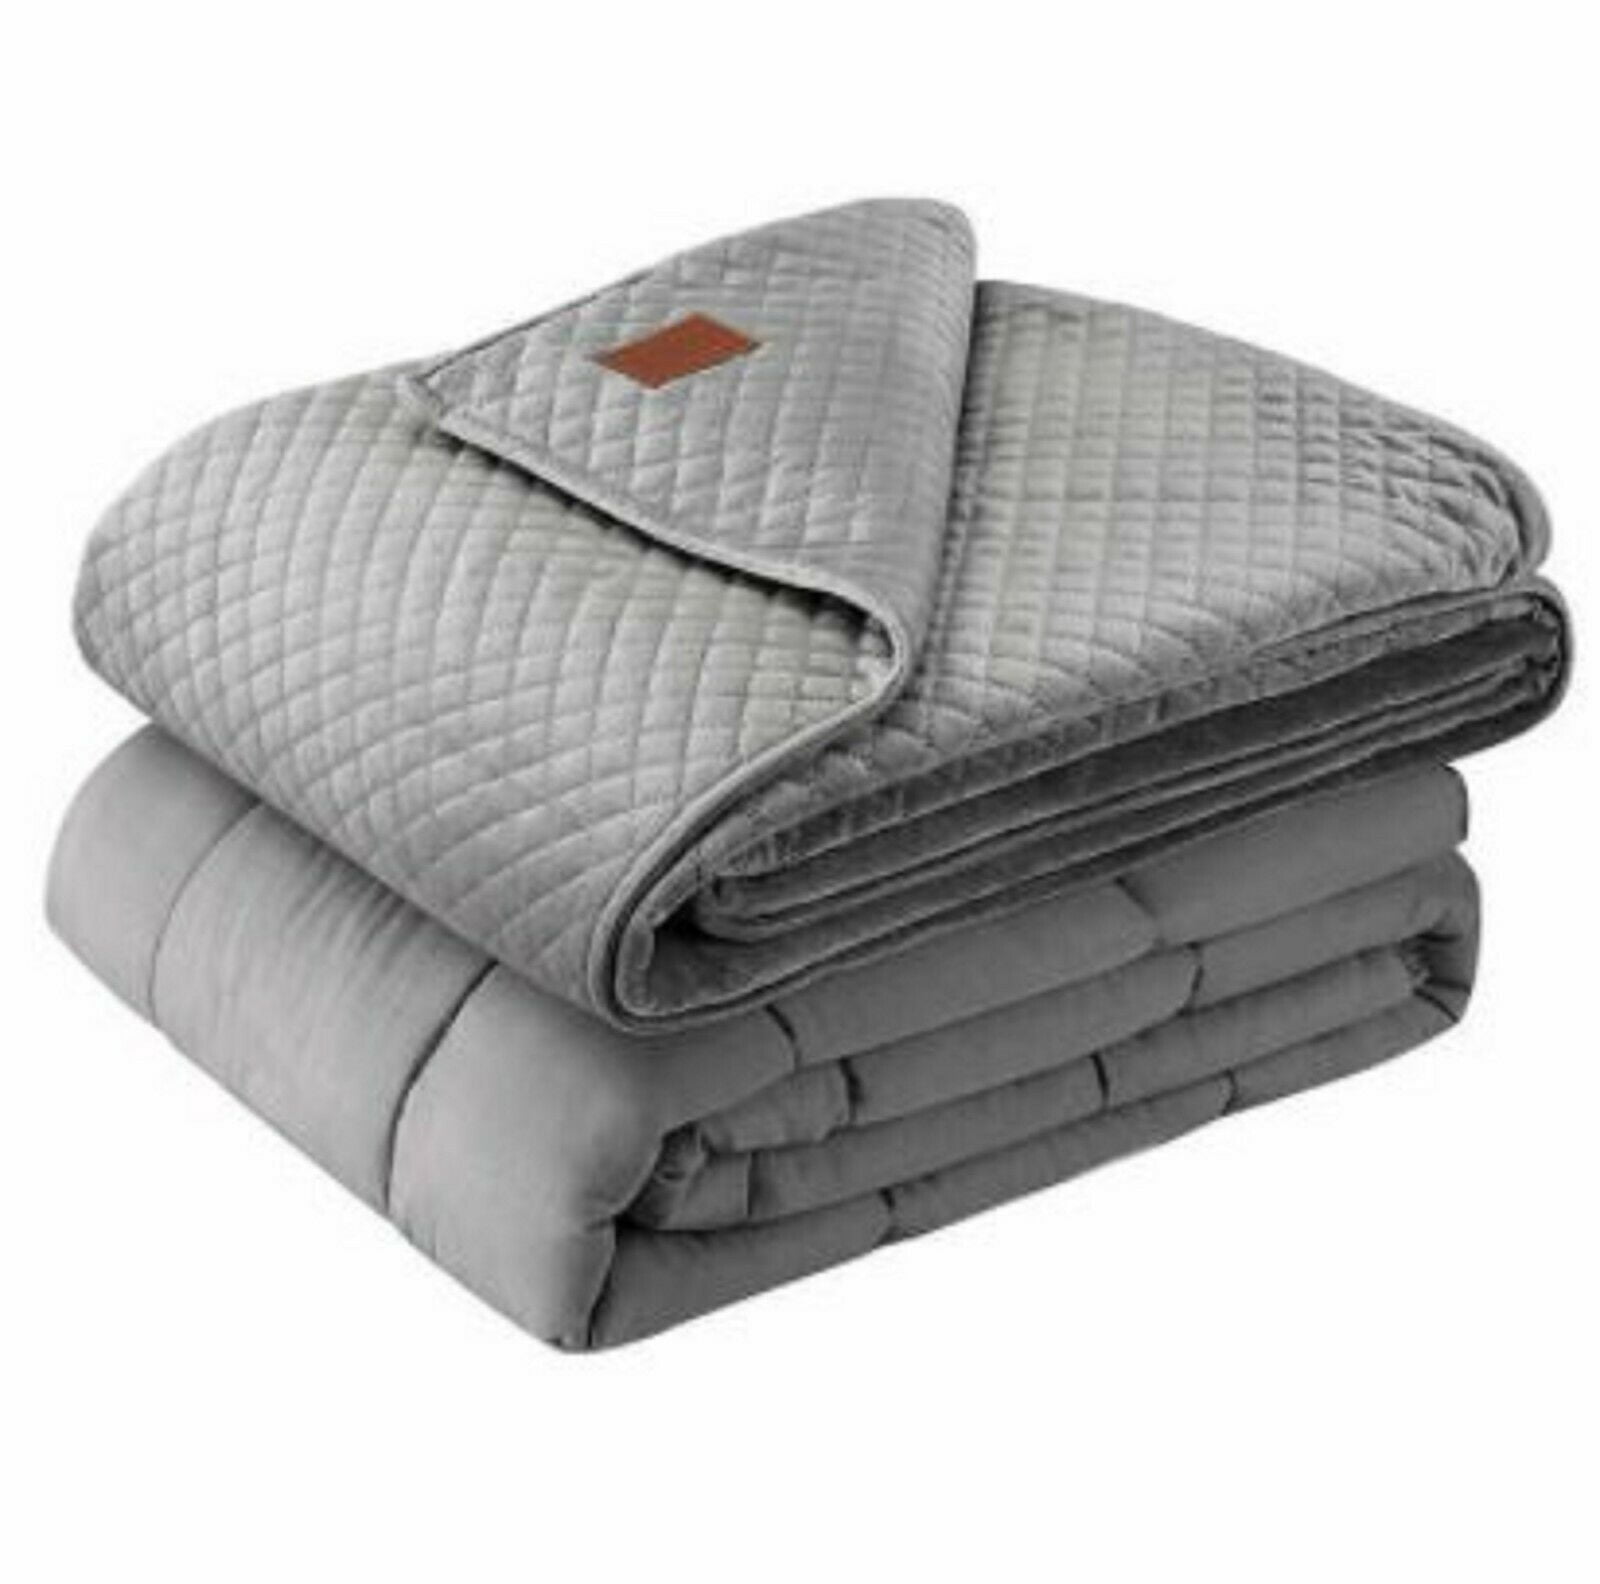 Pendleton Cooling Weighted Blanket Grey 15 lbs 48 in x 72 in - Walmart.com